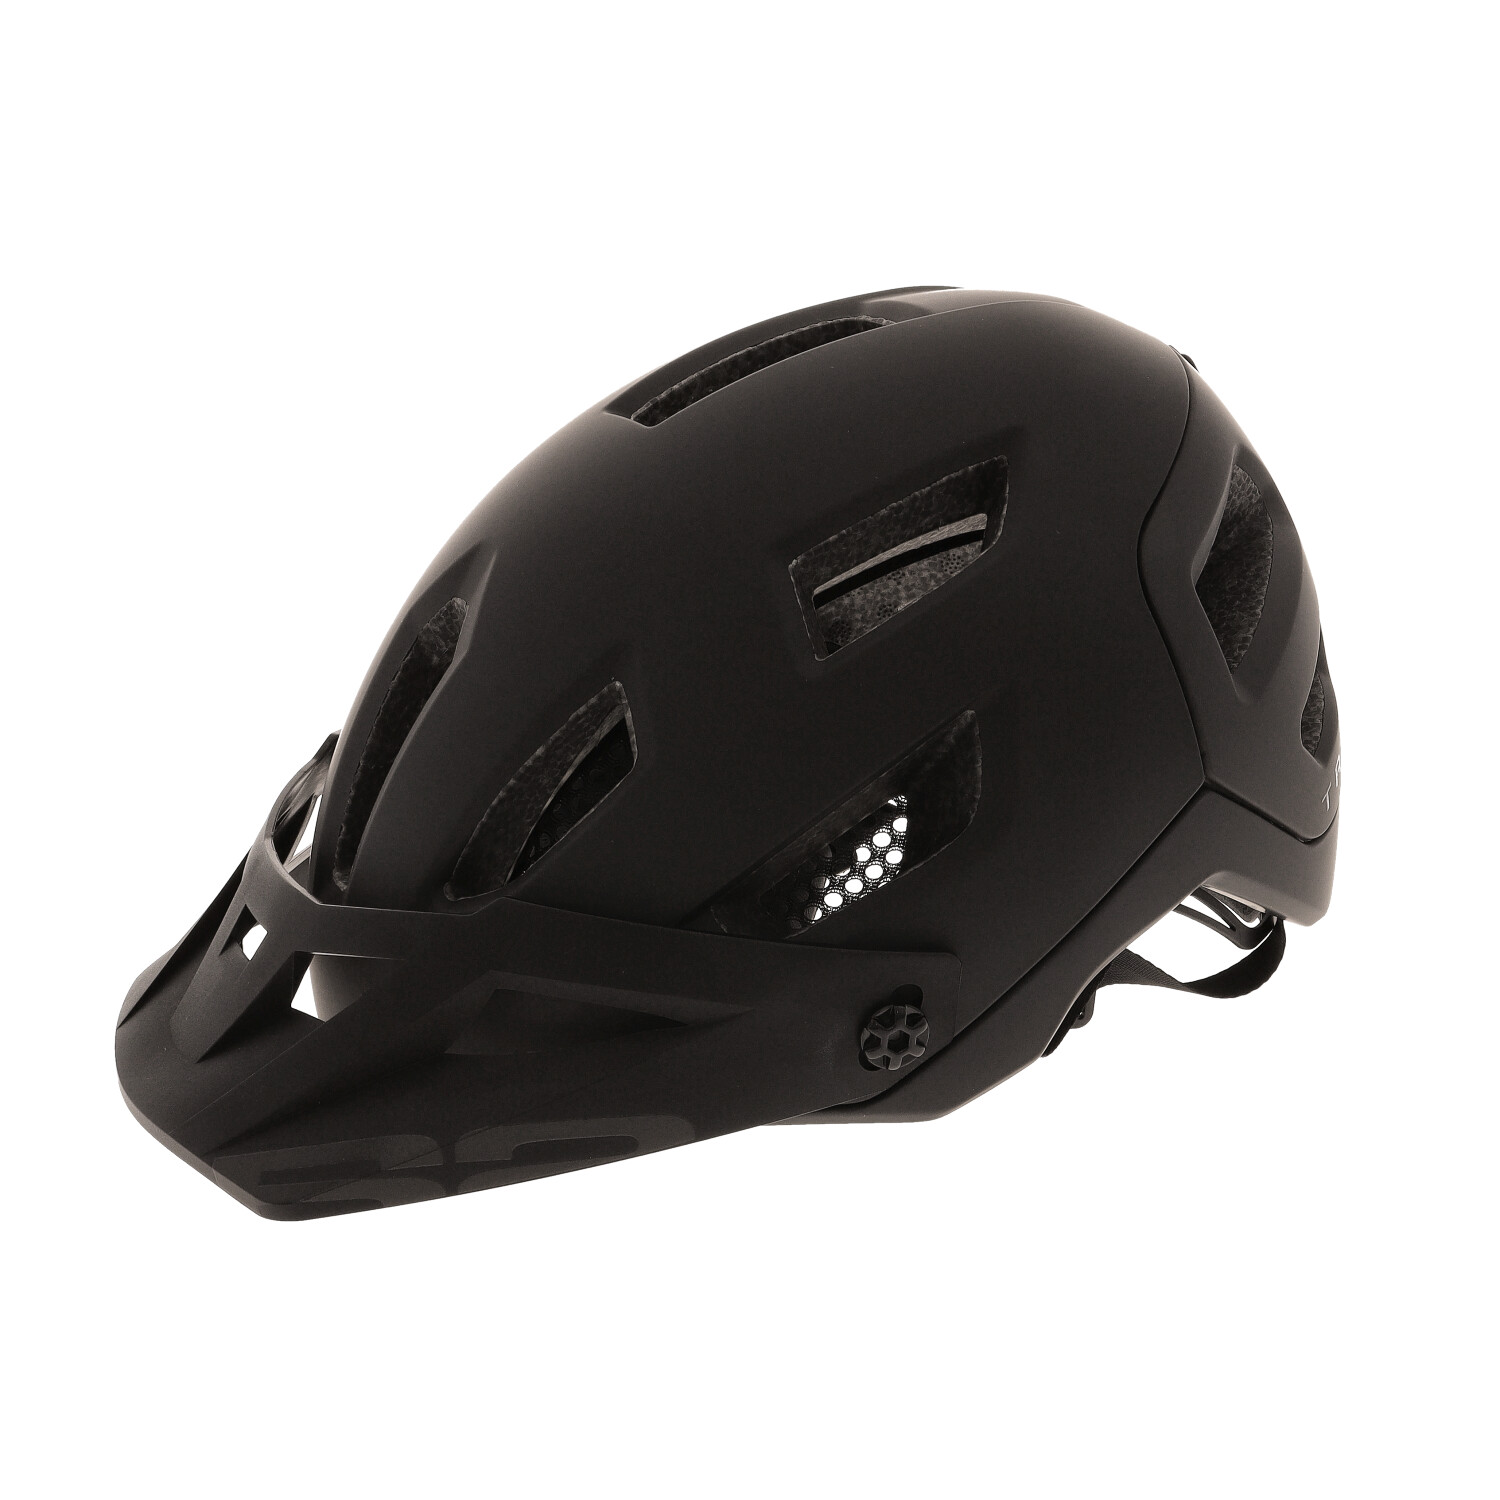 R2 - RIDE YOUR RACE Trail Bicycle Helmet Black